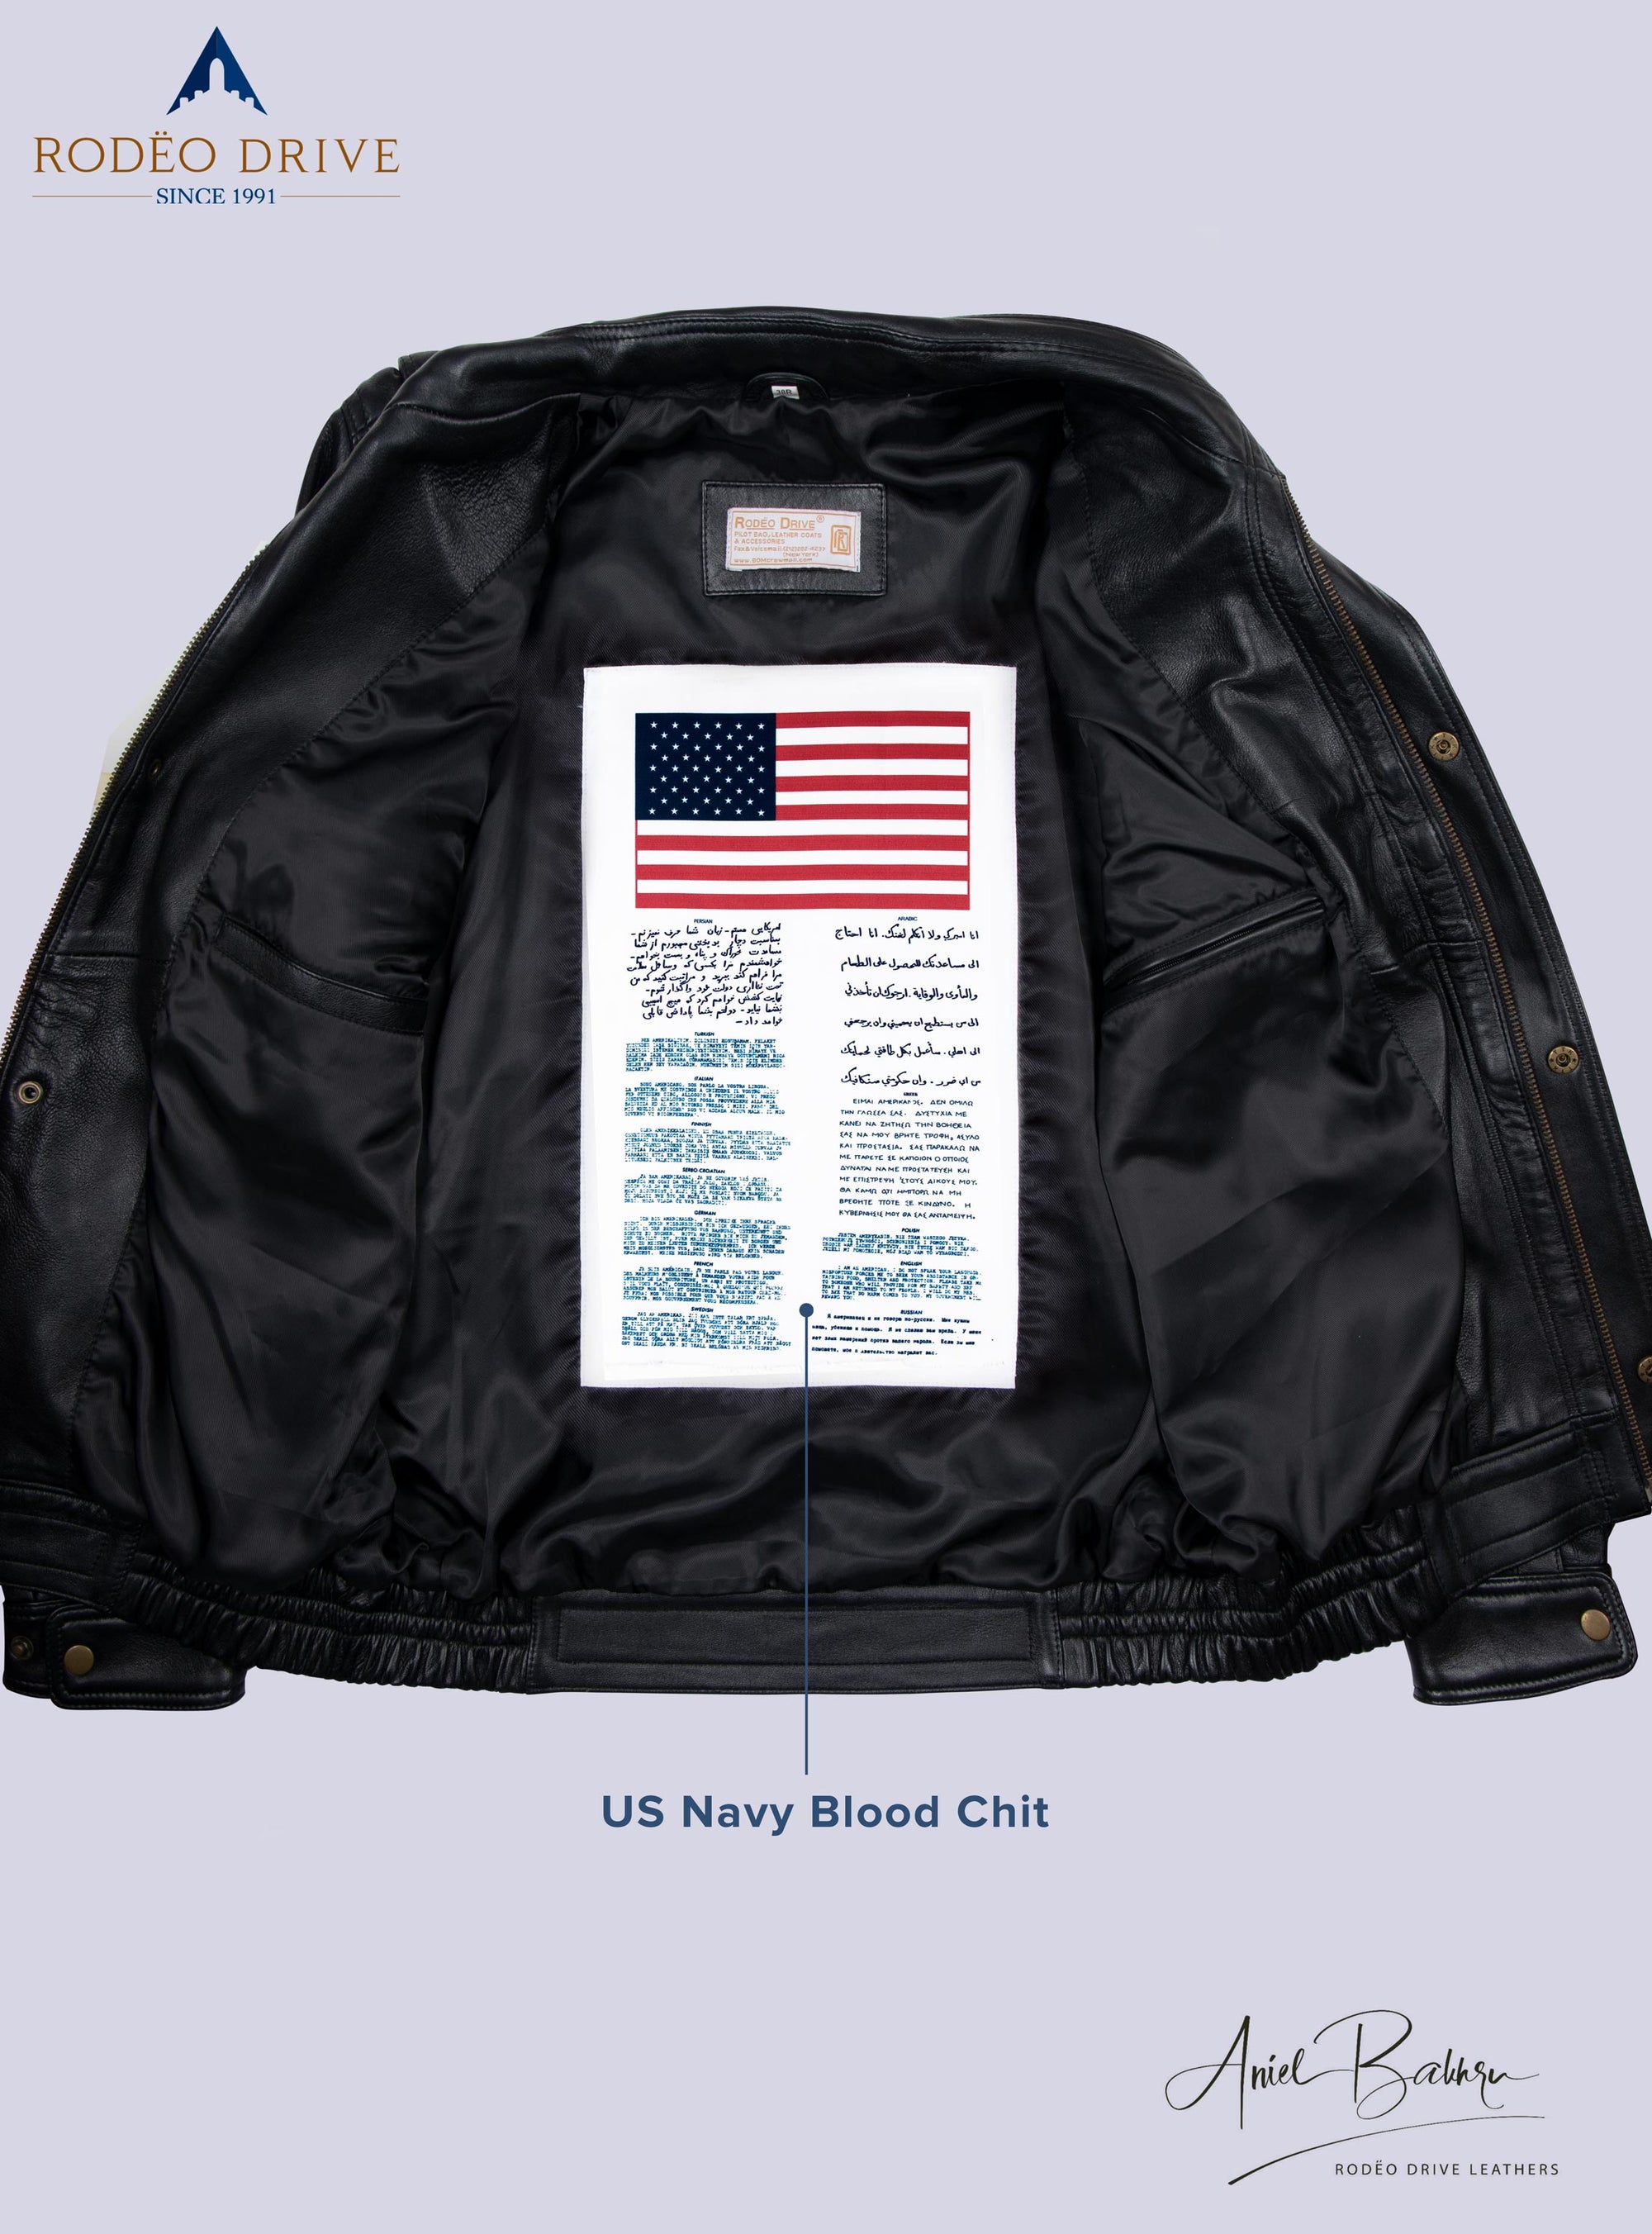 Inside image of BOMBER JACKET . Inside it USA Navy blood chit is sewed